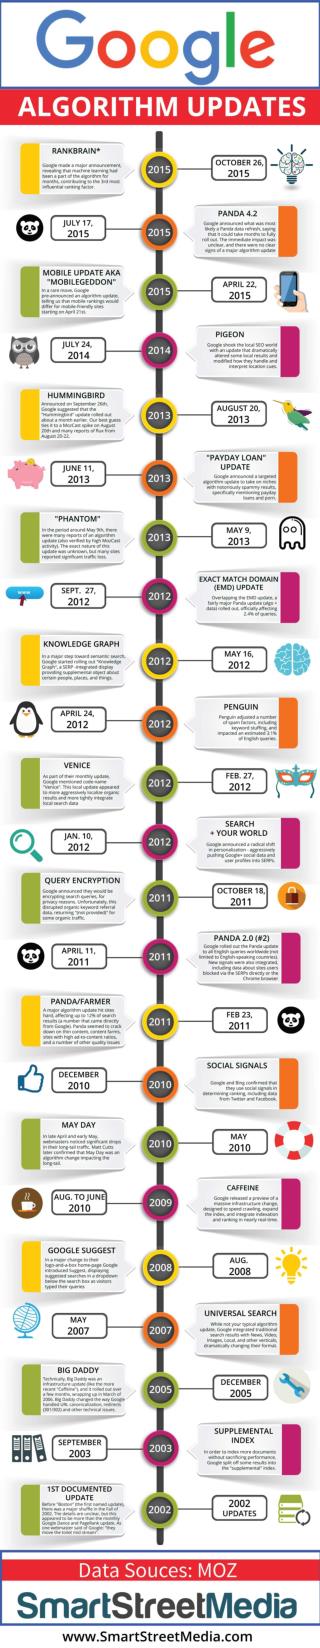 Google Algorithm Update History From 2002-2015 [INFOGRAPHIC]